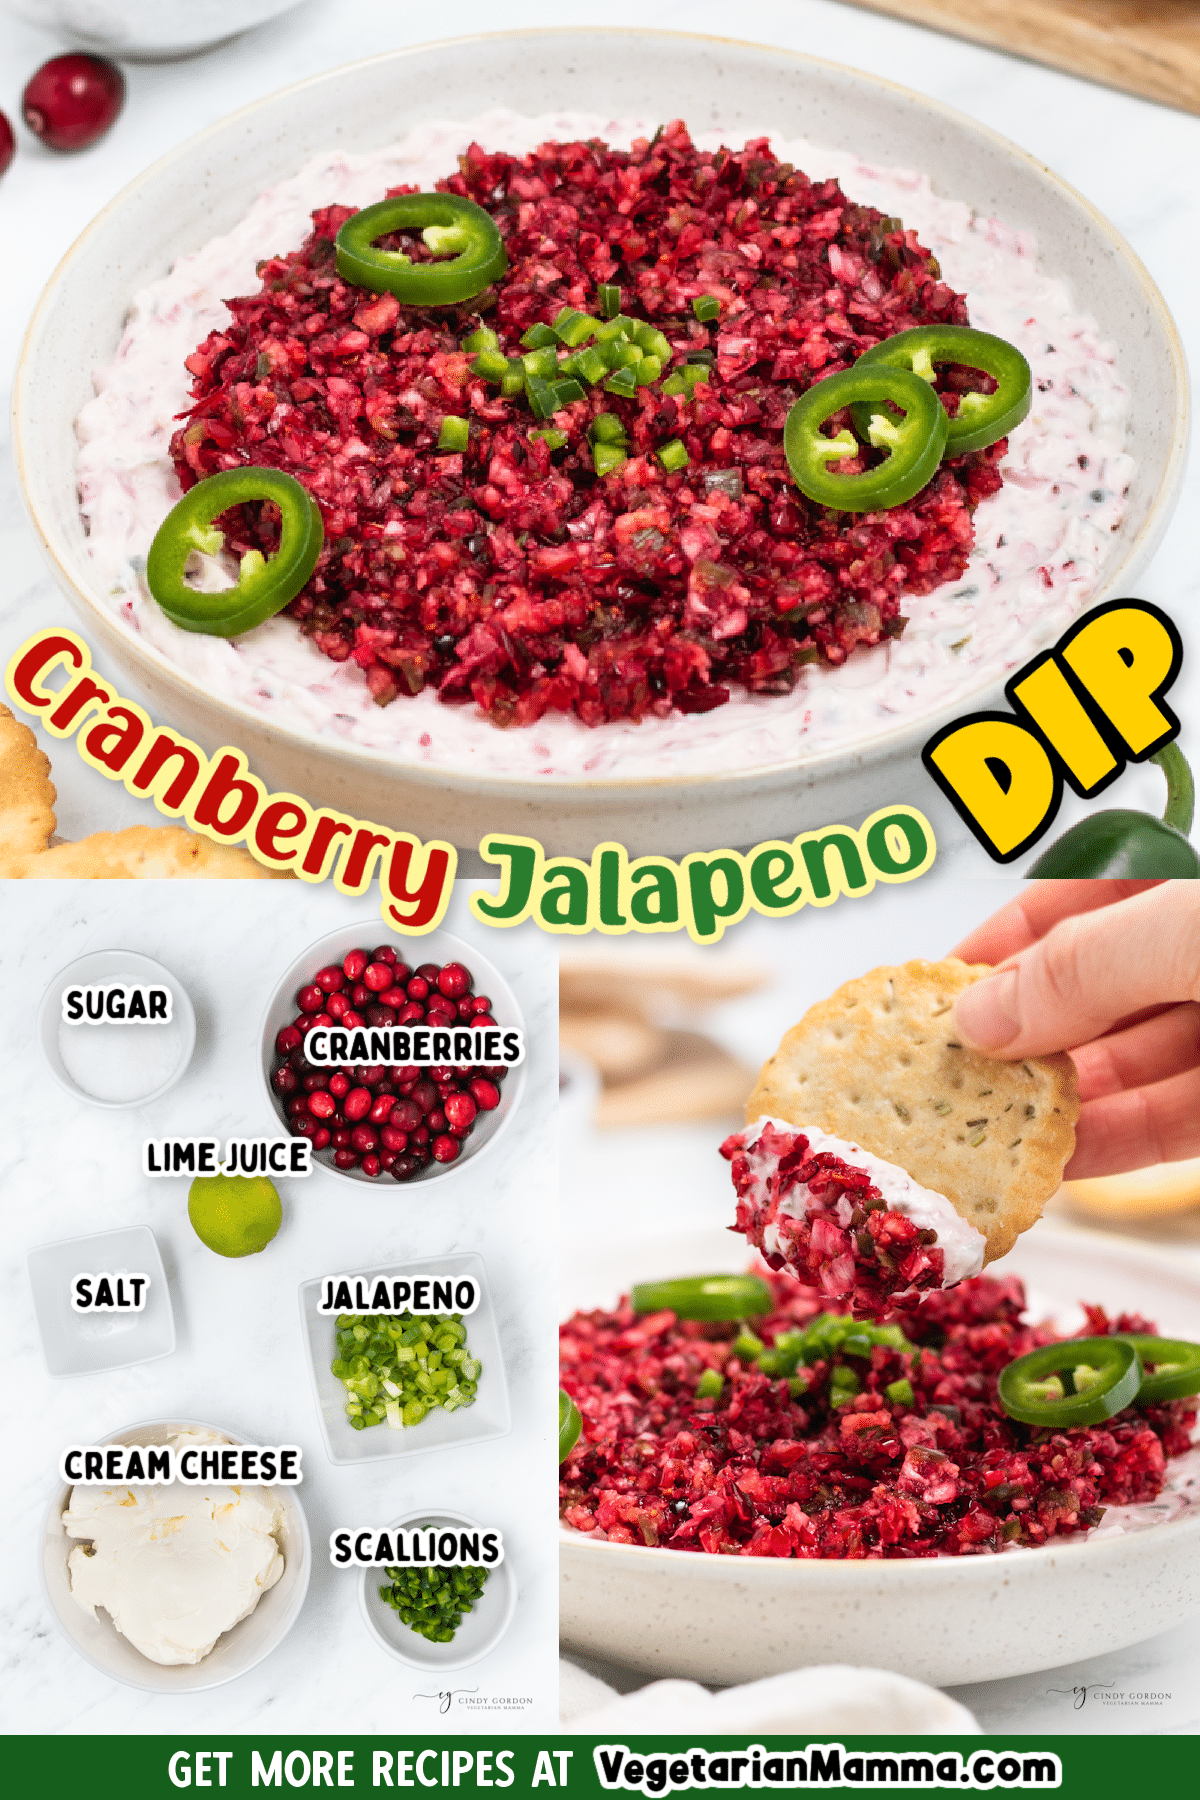 Smooth, savory, spicy, and sweet - Cranberry Jalapeno Dip has all the right flavors! This easy-to-make dip features a simple fresh cranberry and jalapeno pepper salsa blended with cream cheese.